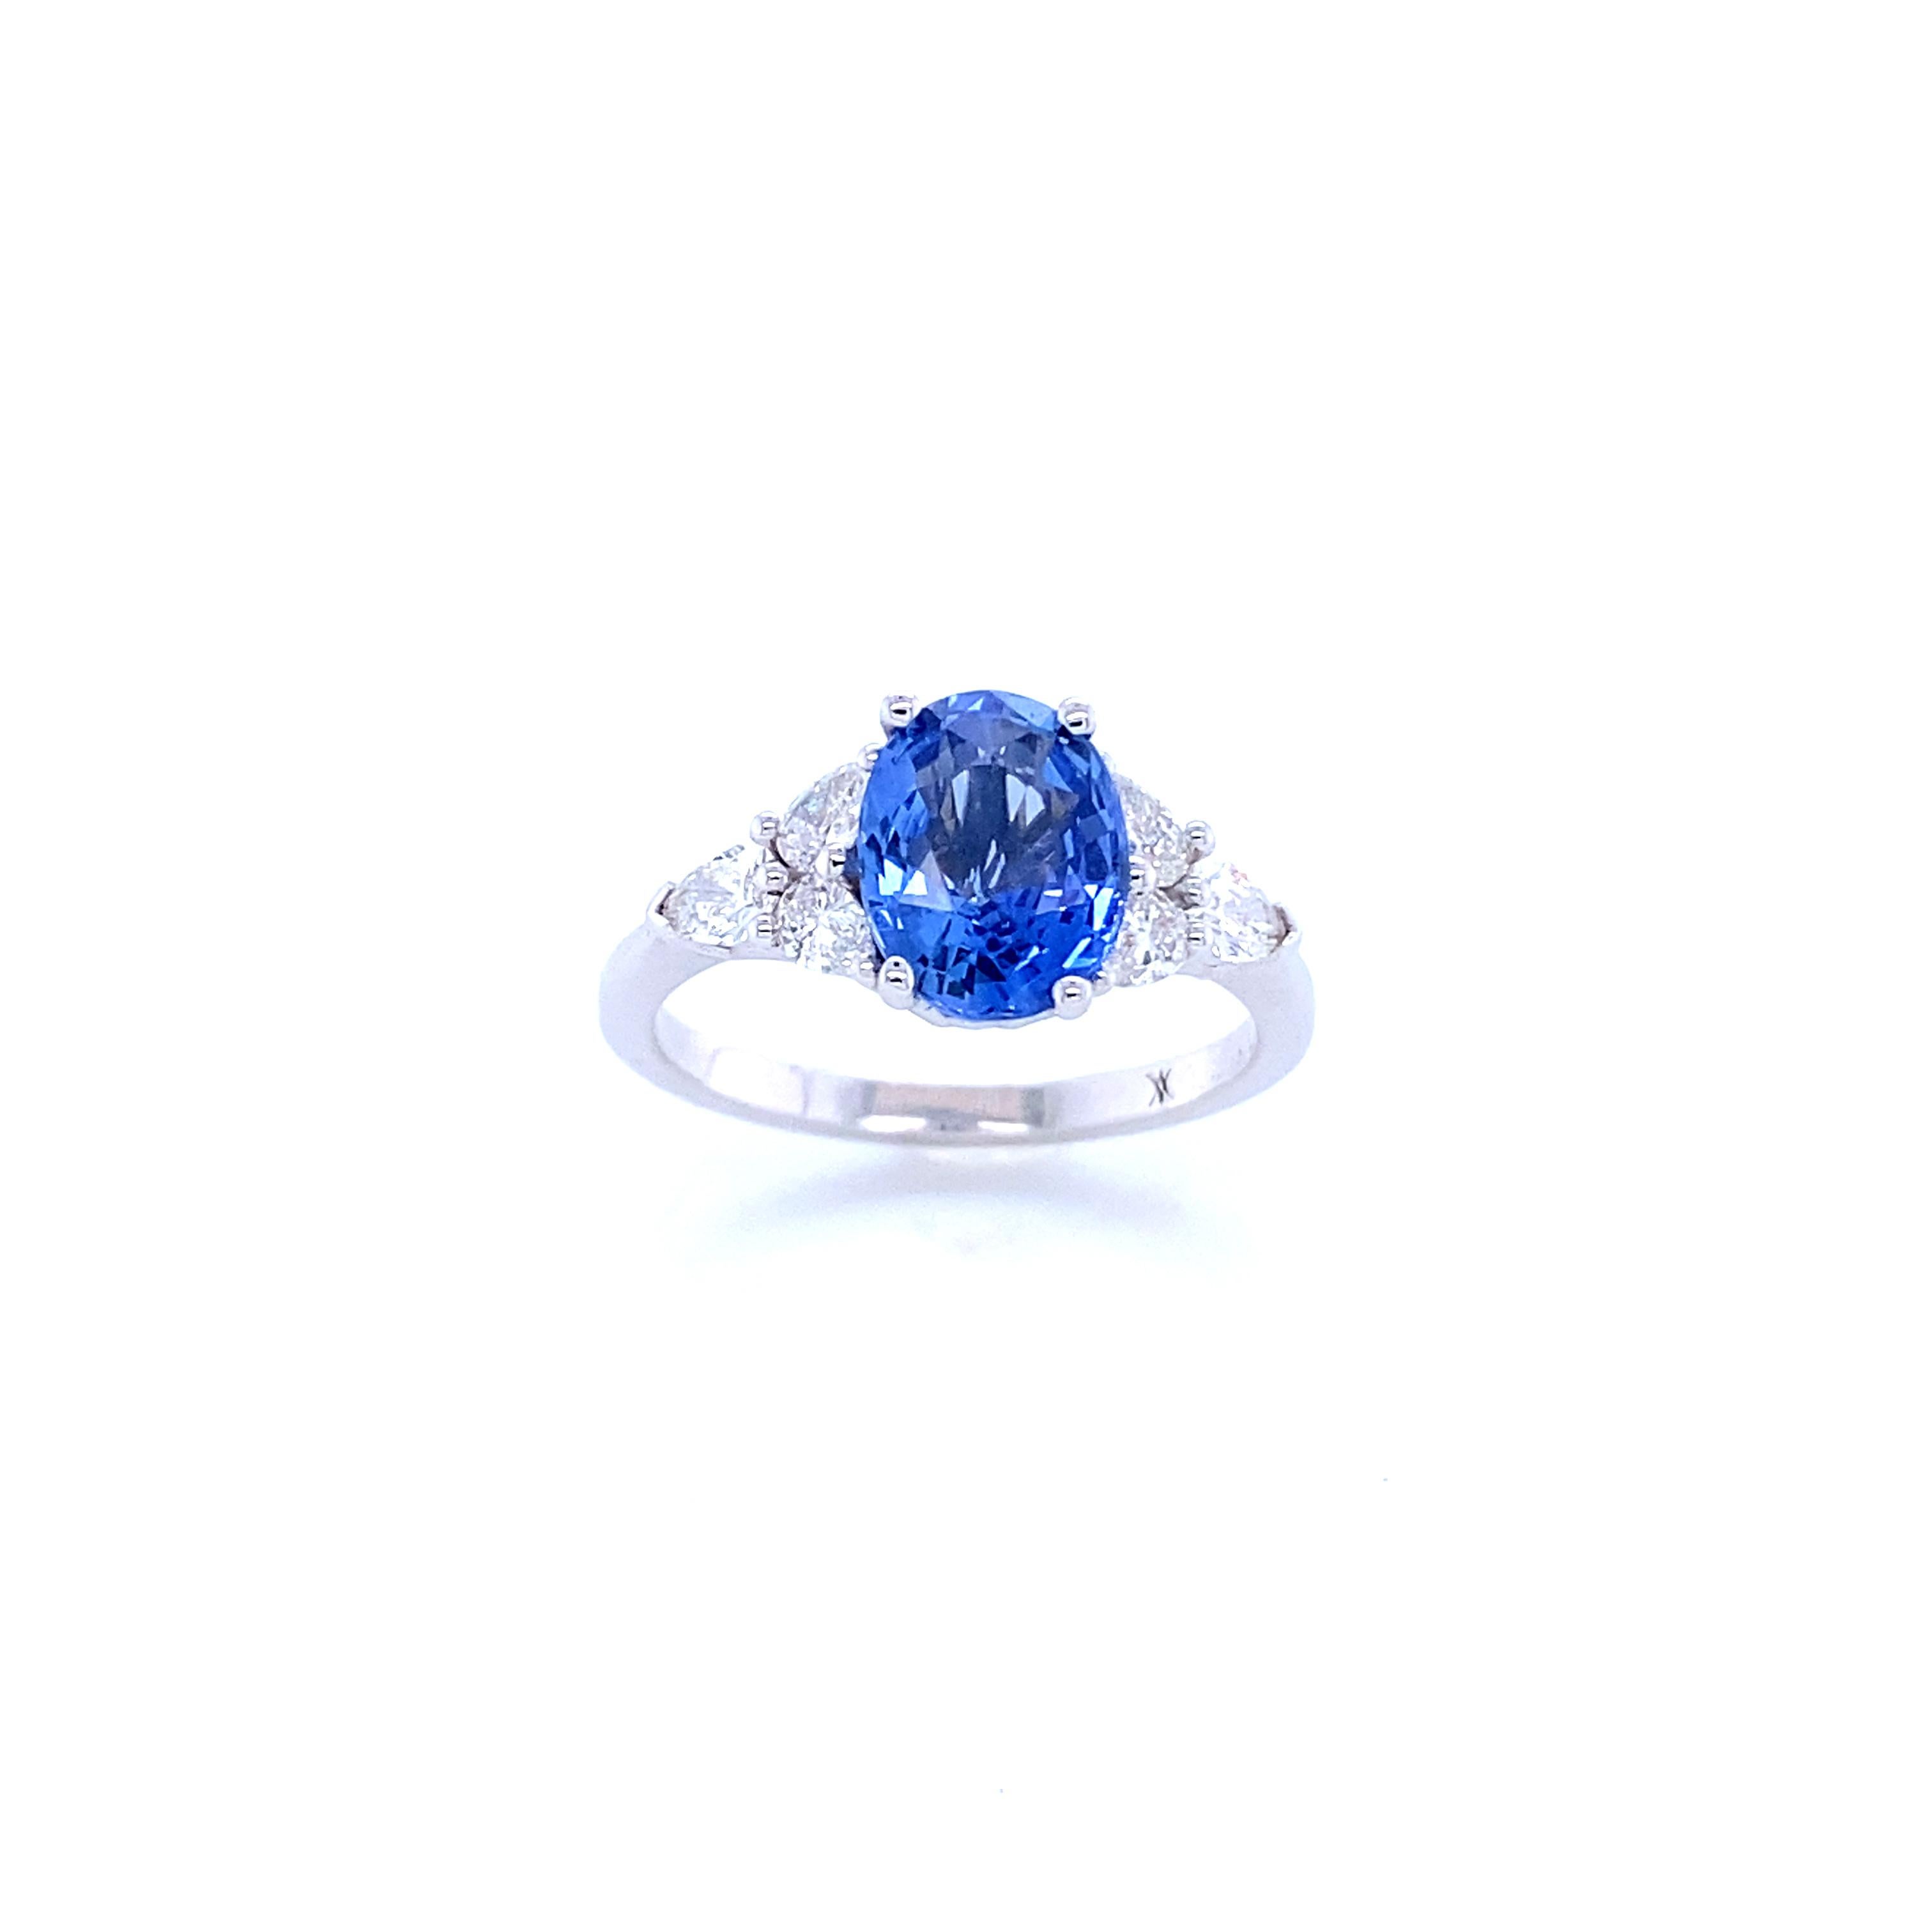 White Gold Ring Acompagned a Oval Sapphire Ceylan Surrounded by Diamonds.
White gold ring acompagned with a oval sapphire  Ceylan of 2.3 grams, color Royal Blue.
Surrounded by 4 Pear shapped Diamonds for 0.23 carats and 2 Pear shapped Diamonds for